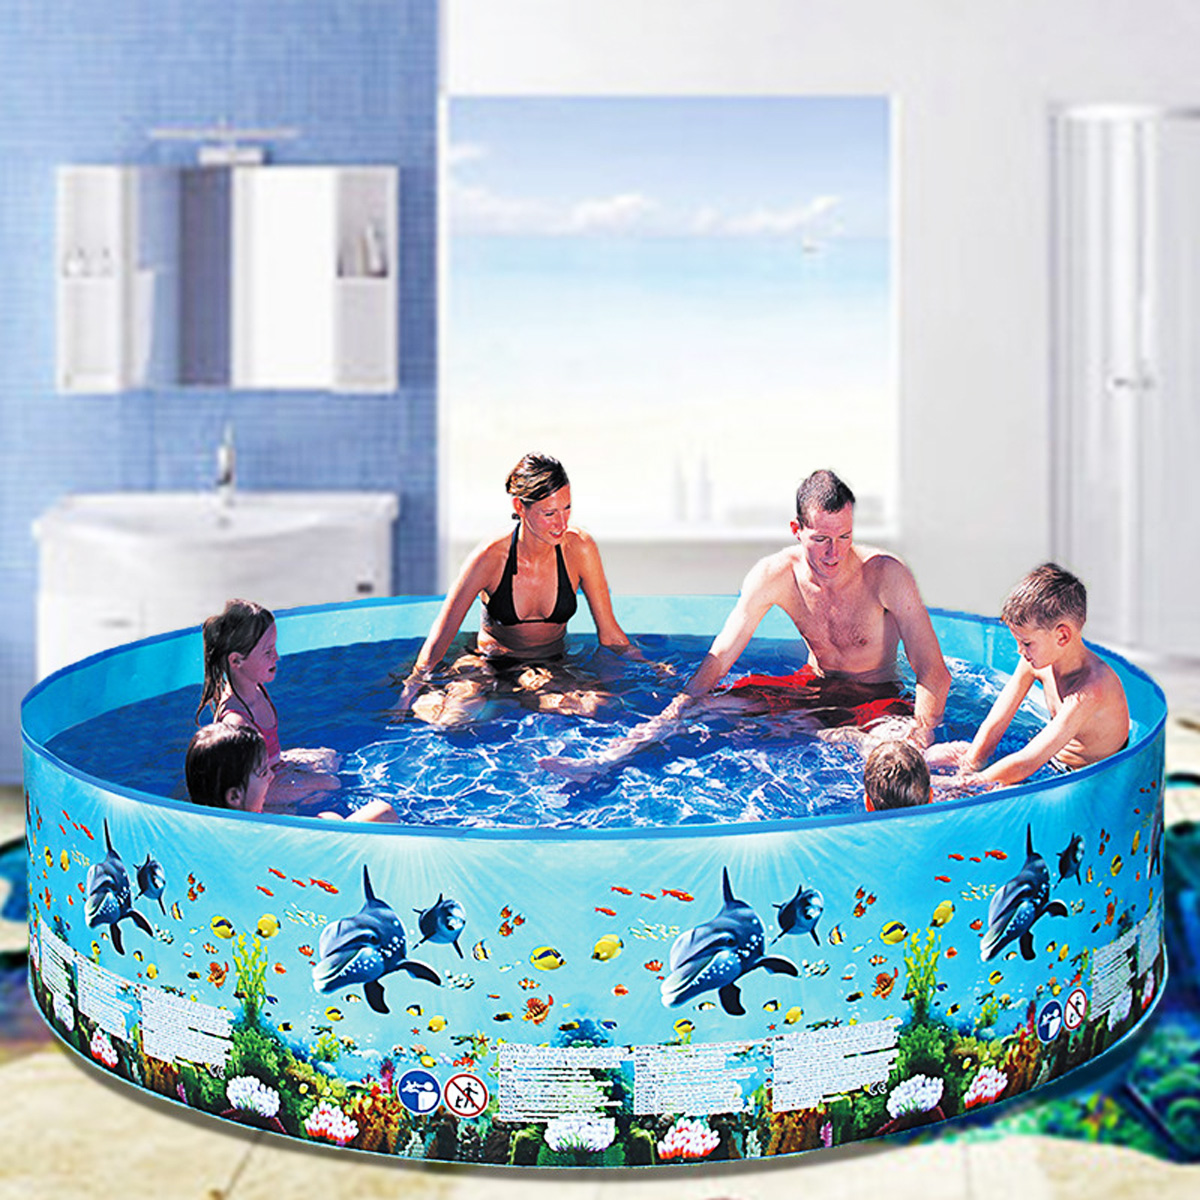 183244x38cm-No-Need-Inflatable-Swimming-Pool-Summer-Holiday-Children-Paddling-Pools-Beach-Family-Gam-1675411-3